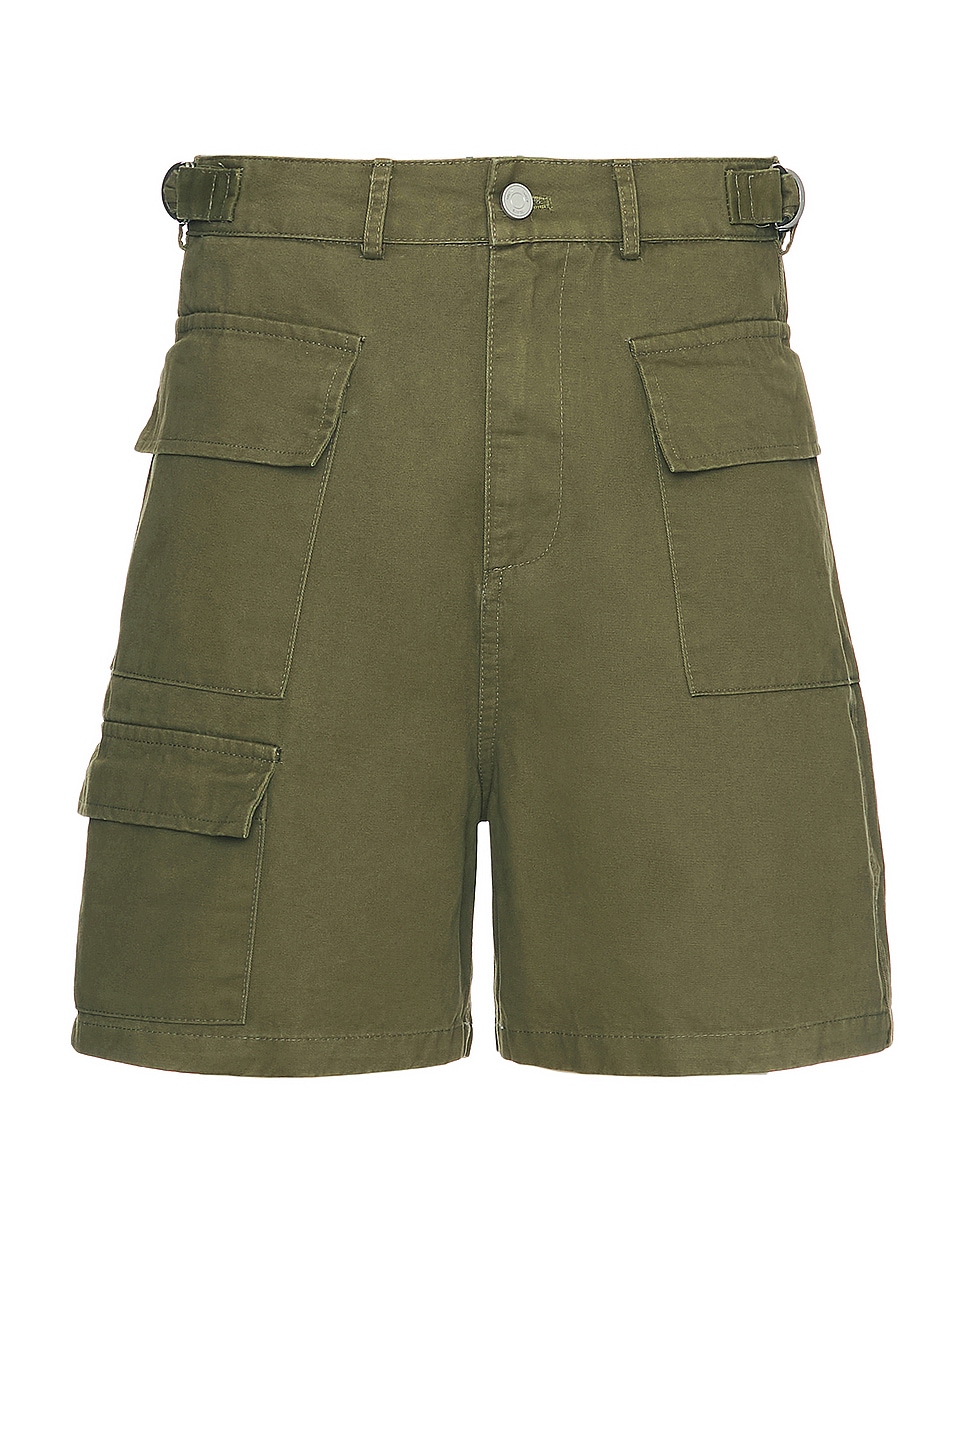 Image 1 of Found Twill Cargo Shorts in Vintage Olive